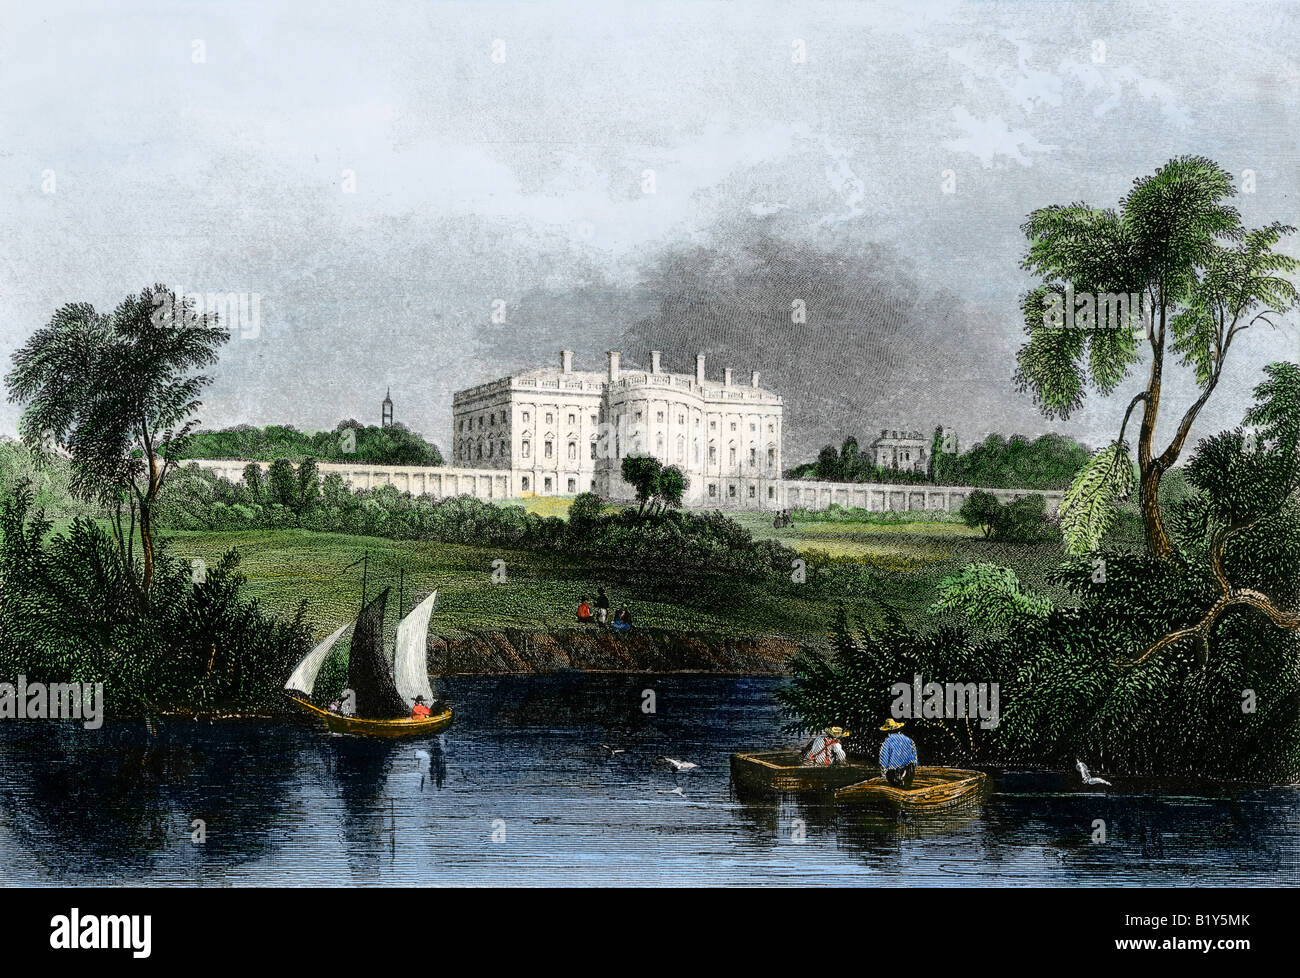 White House viewed from the Potomac River about 1860. Hand-colored steel engraving Stock Photo